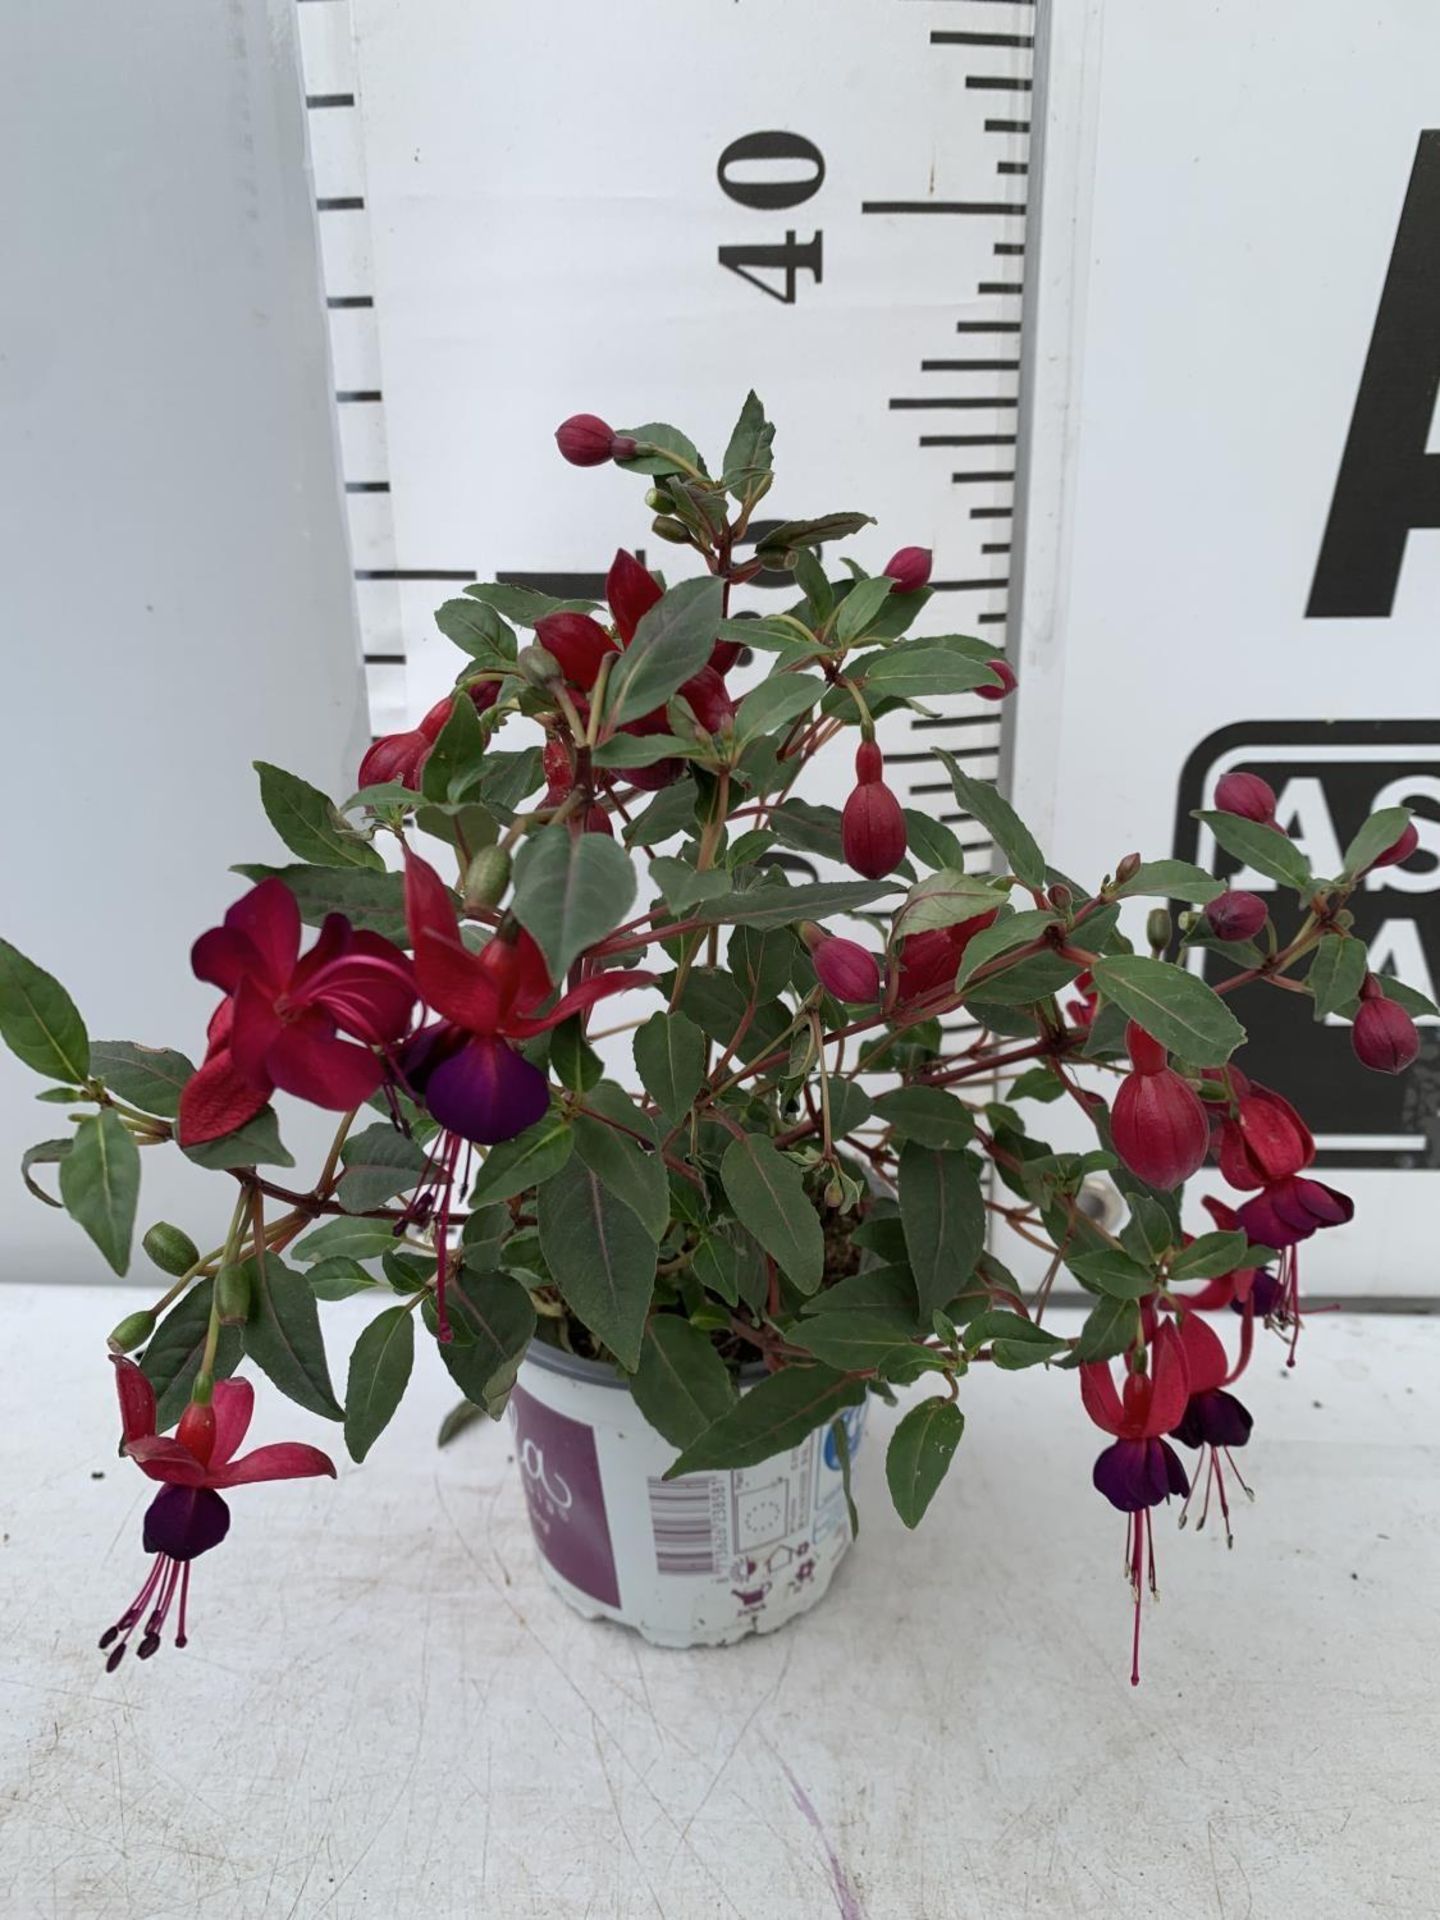 NINE FUCHSIA BELLA IN 20CM POTS 20-30CM TALL TO BE SOLD FOR THE NINE PLUS VAT - Image 8 of 8